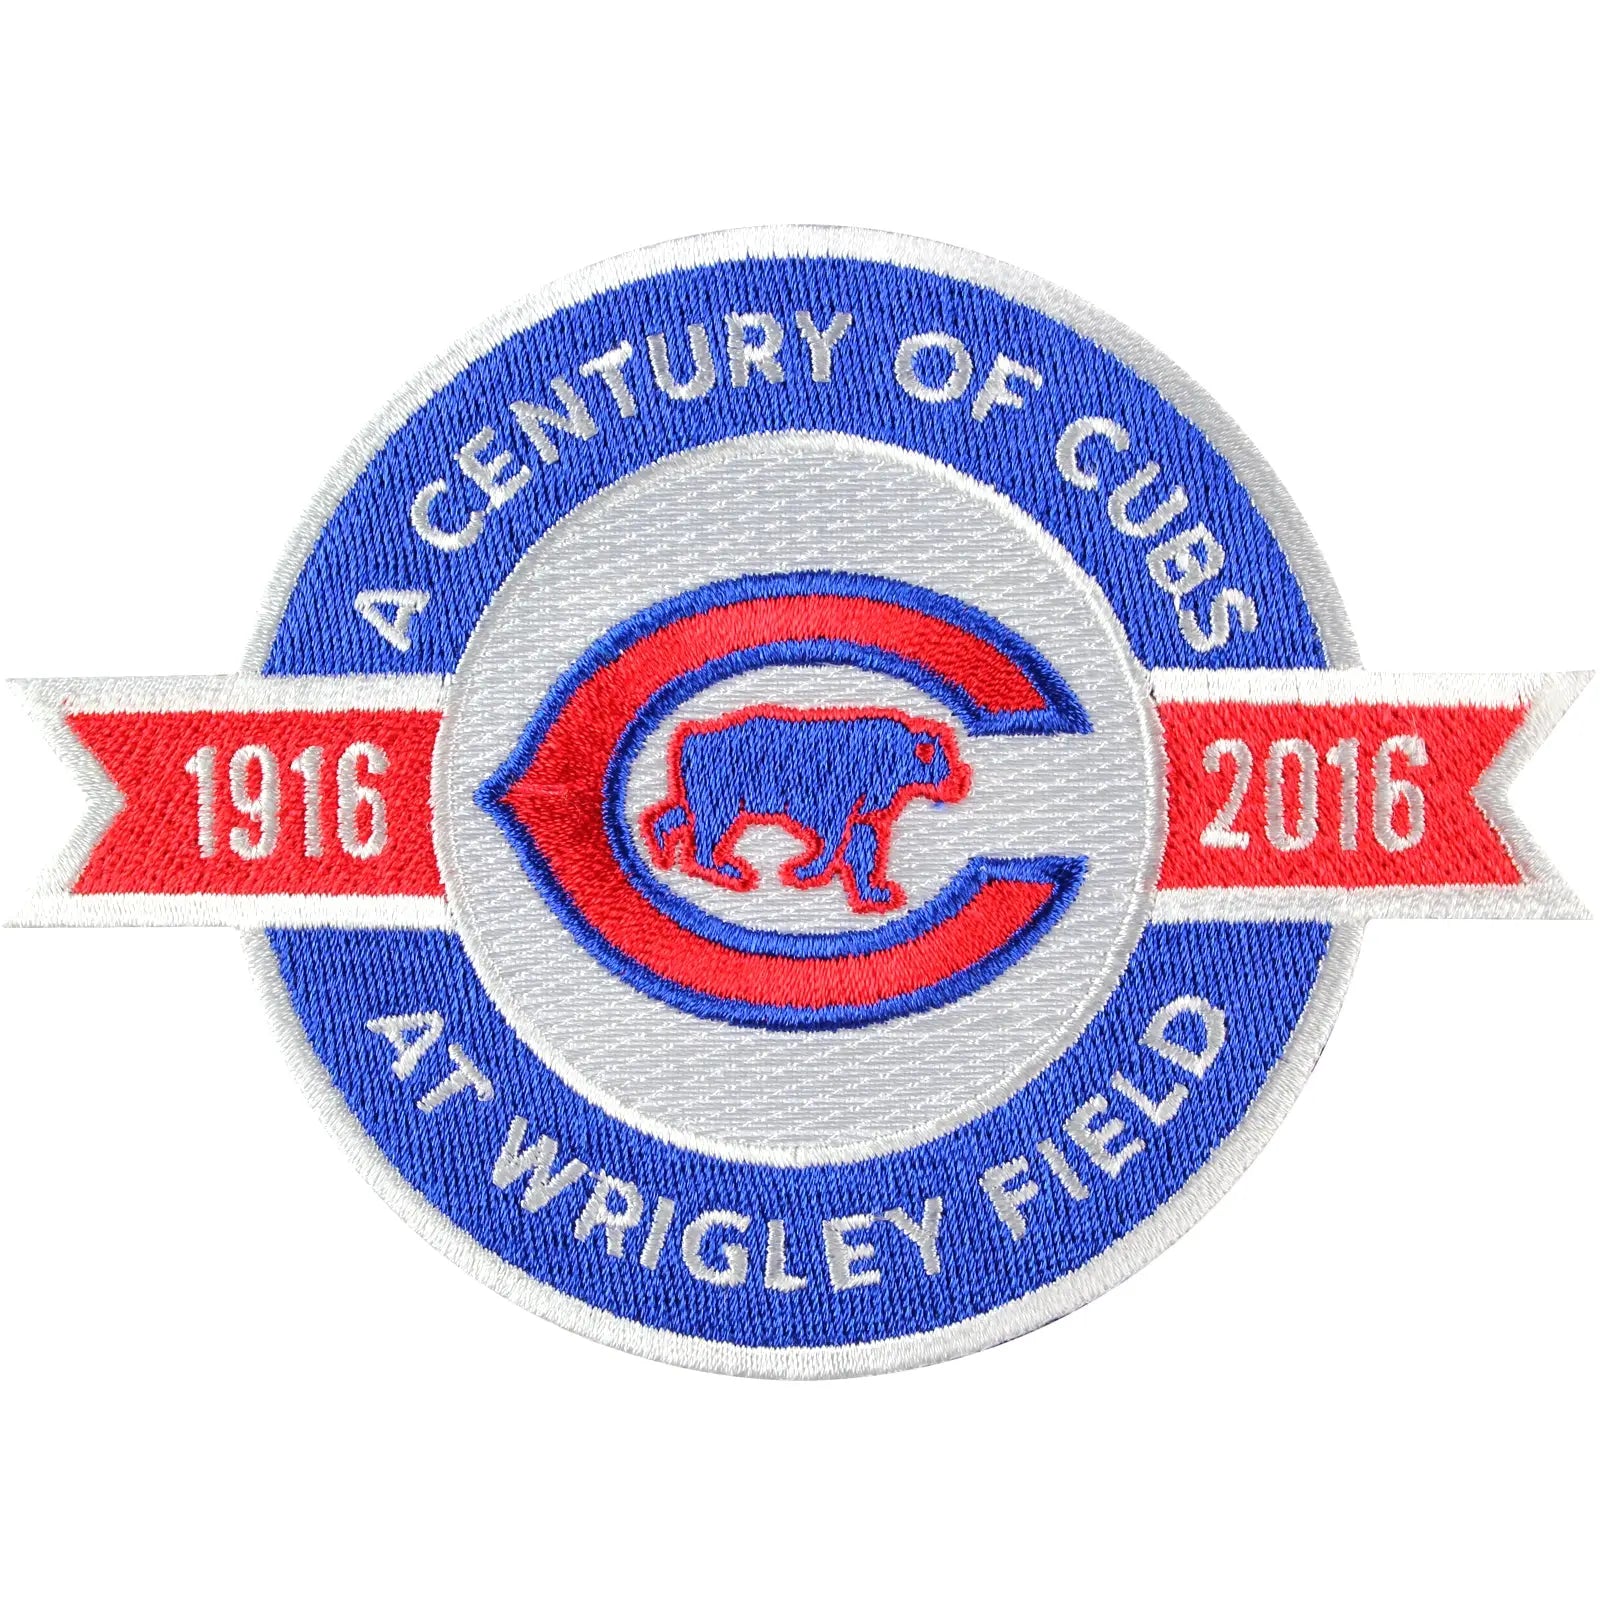 2016 Chicago Cubs A Century of Cubs At Wrigley Field 100th Anniversary Jersey Sleeve Patch 